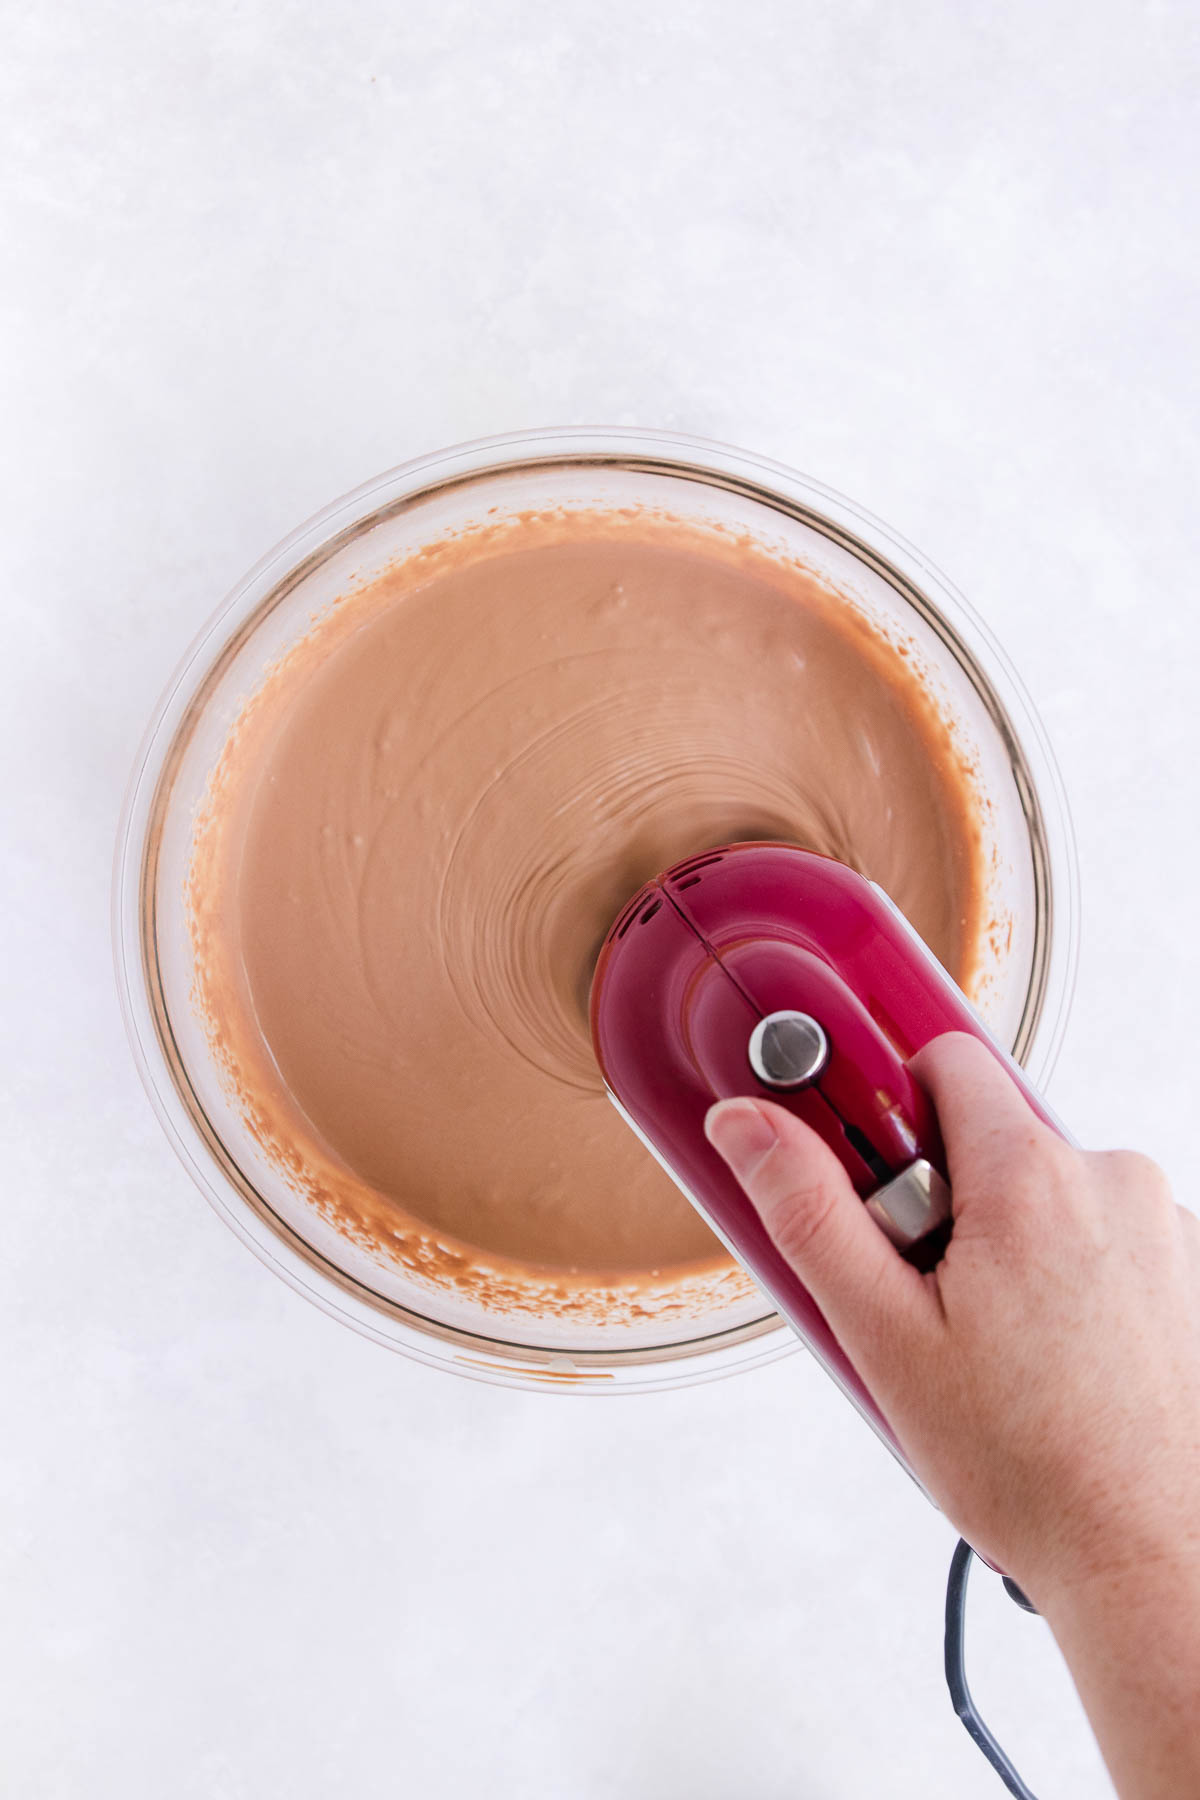 The mousse mixture being whipped with an electric hand mixer.